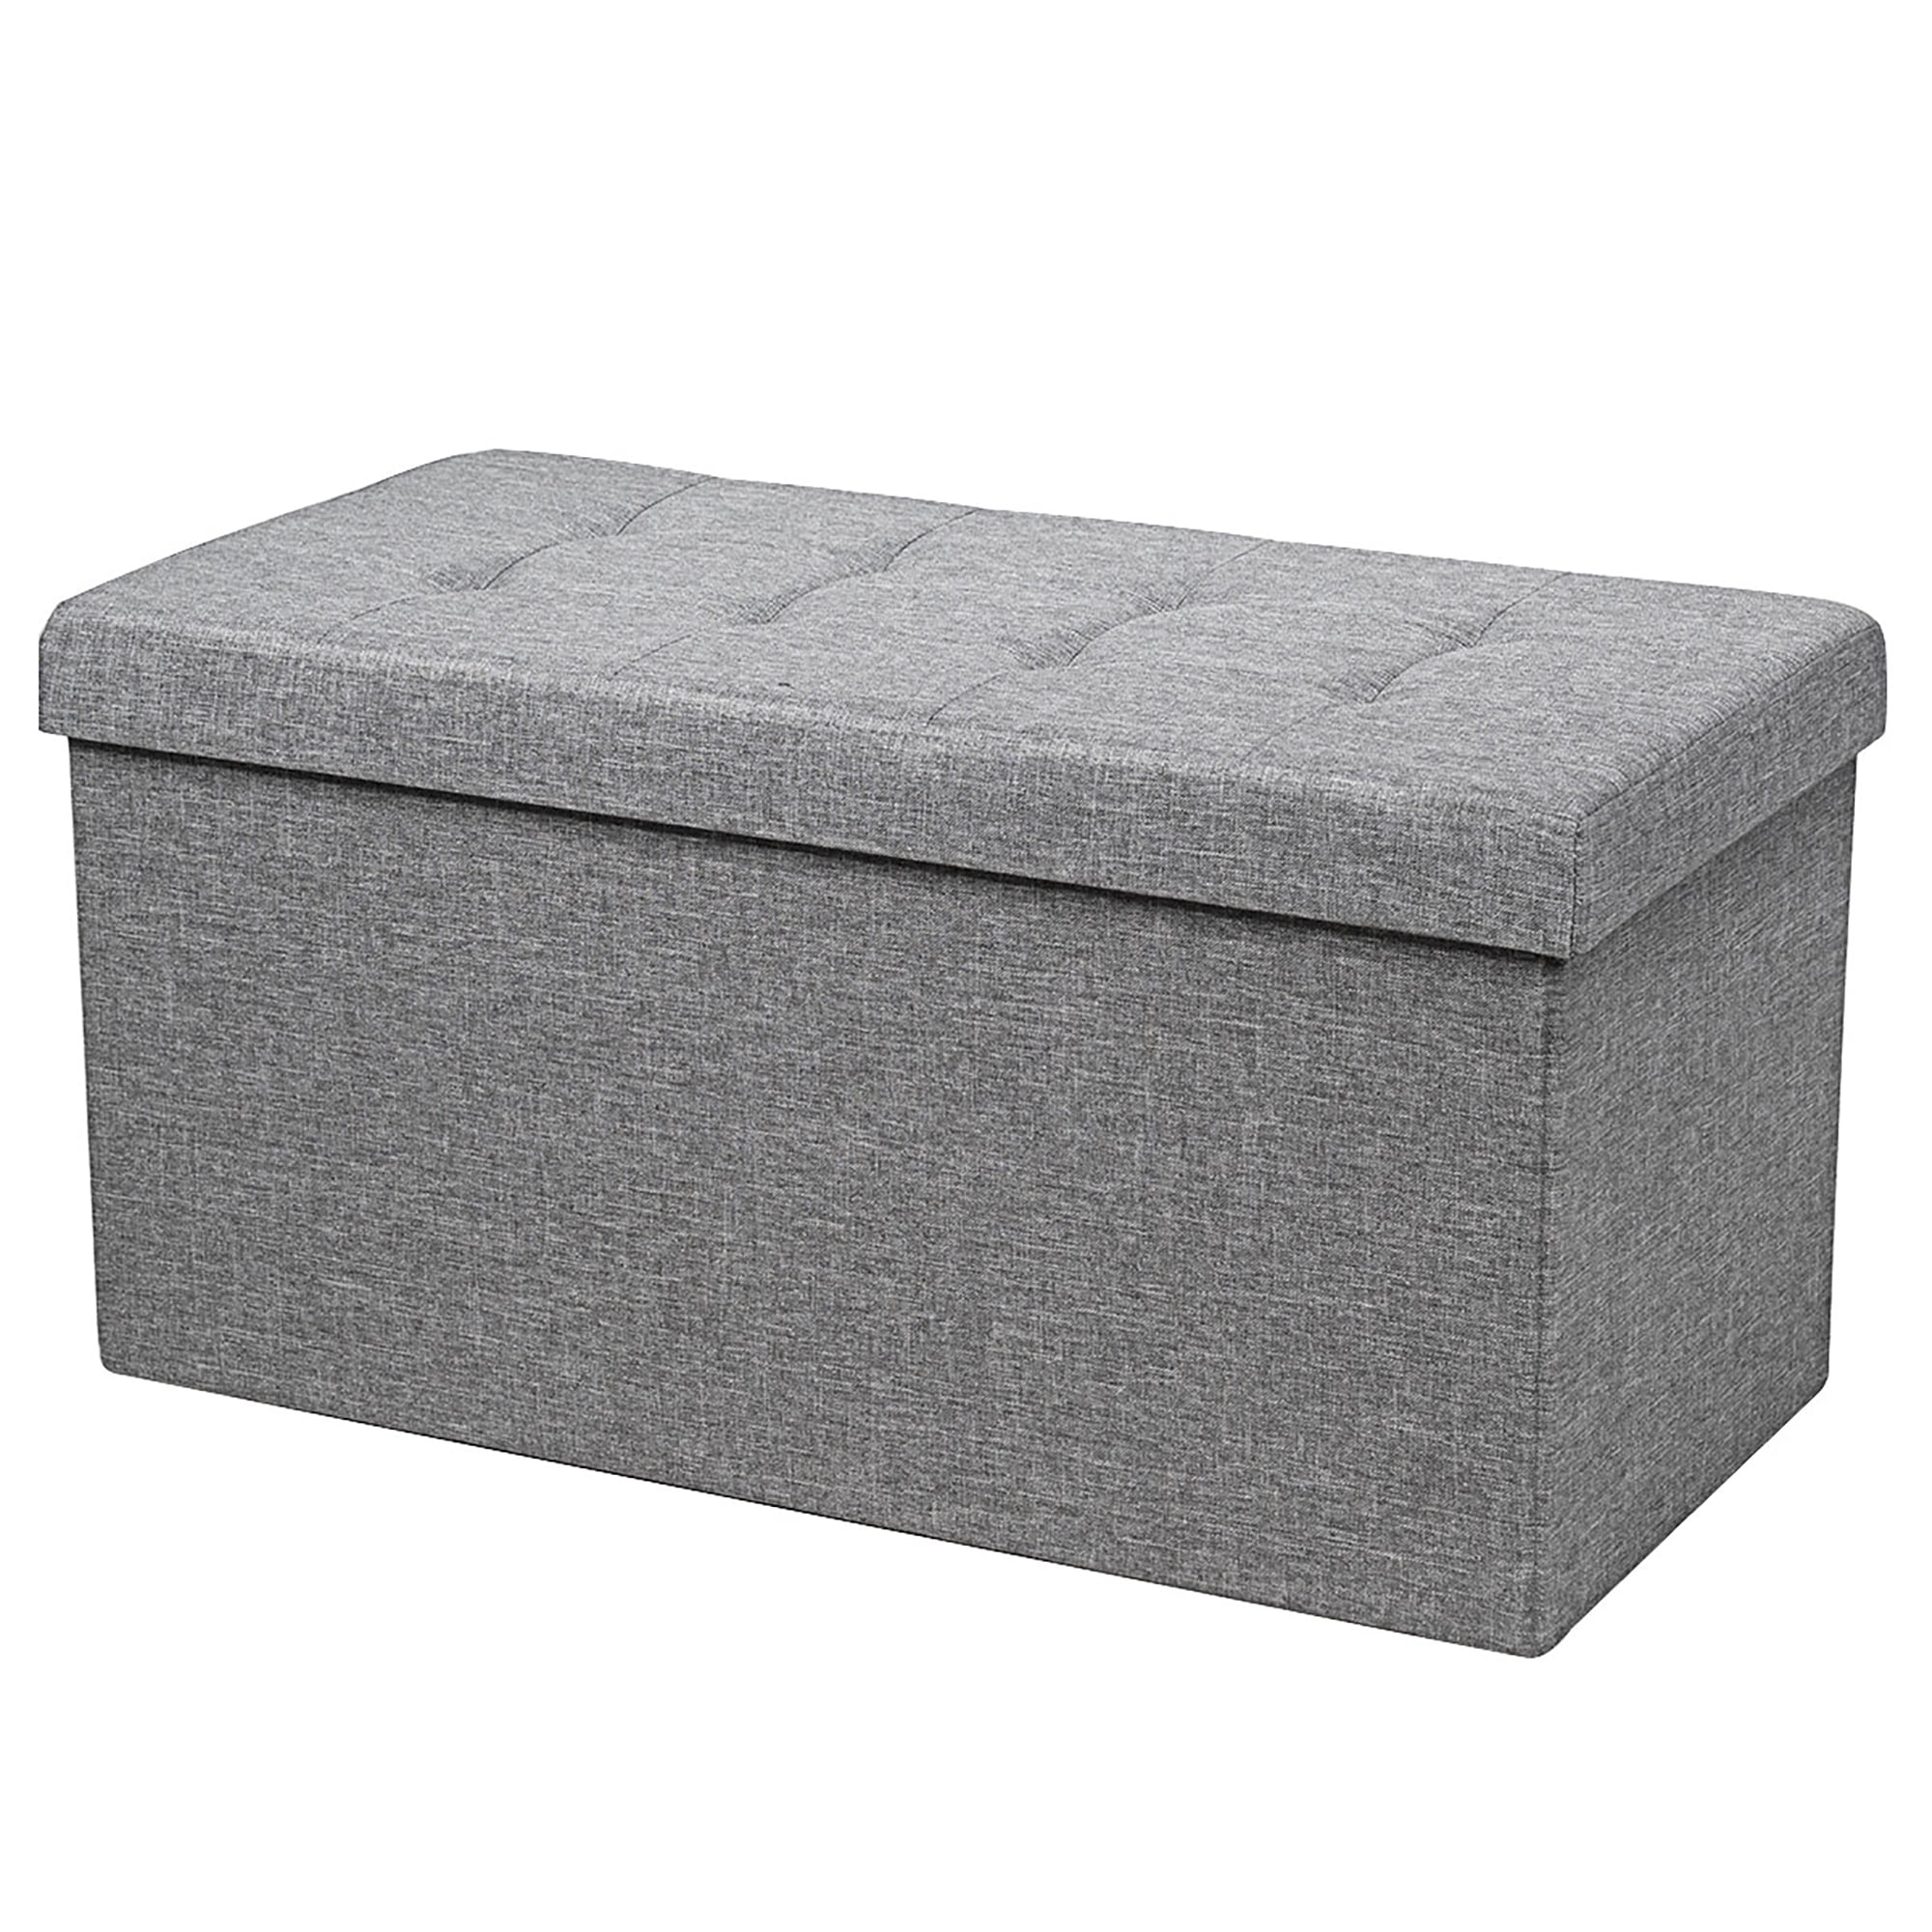 Folding Bench Upholstered Stool Storage Box Seat Stool Sitting Resting A Foot Rest 